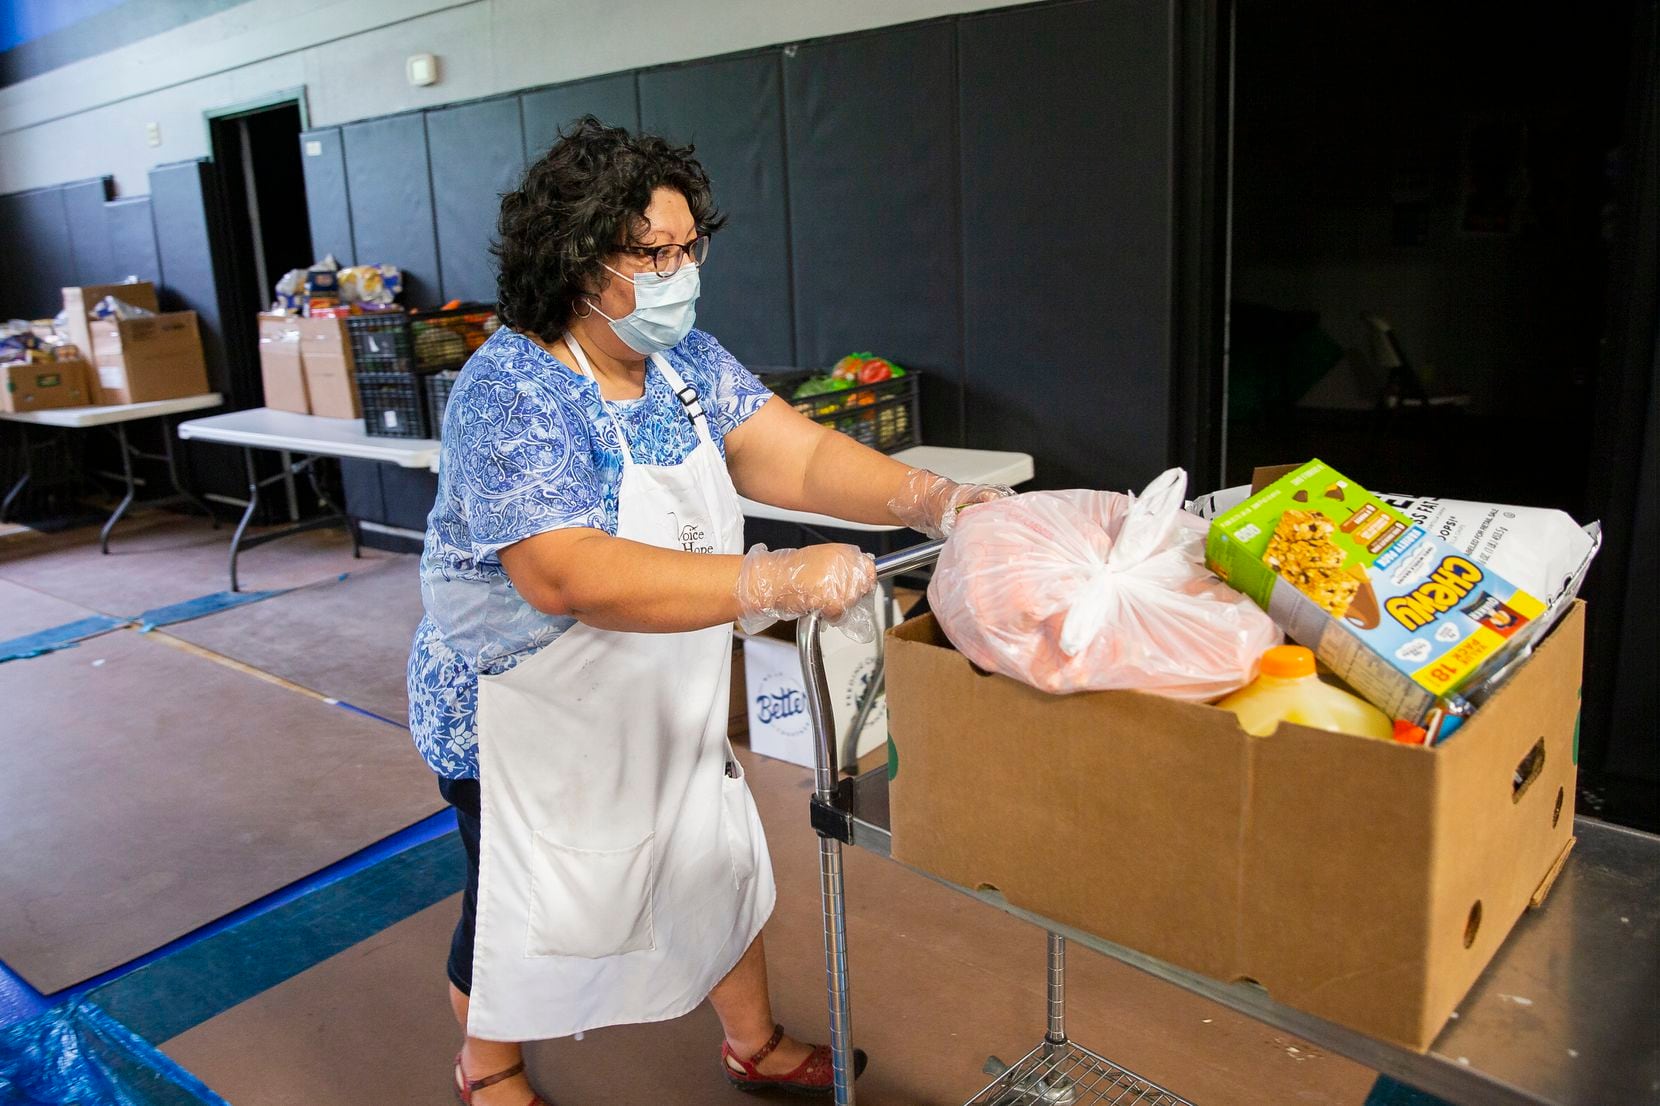 Debbie Orozco Solis works at the Voice of Hope food pantry in West Dallas. She is determined...